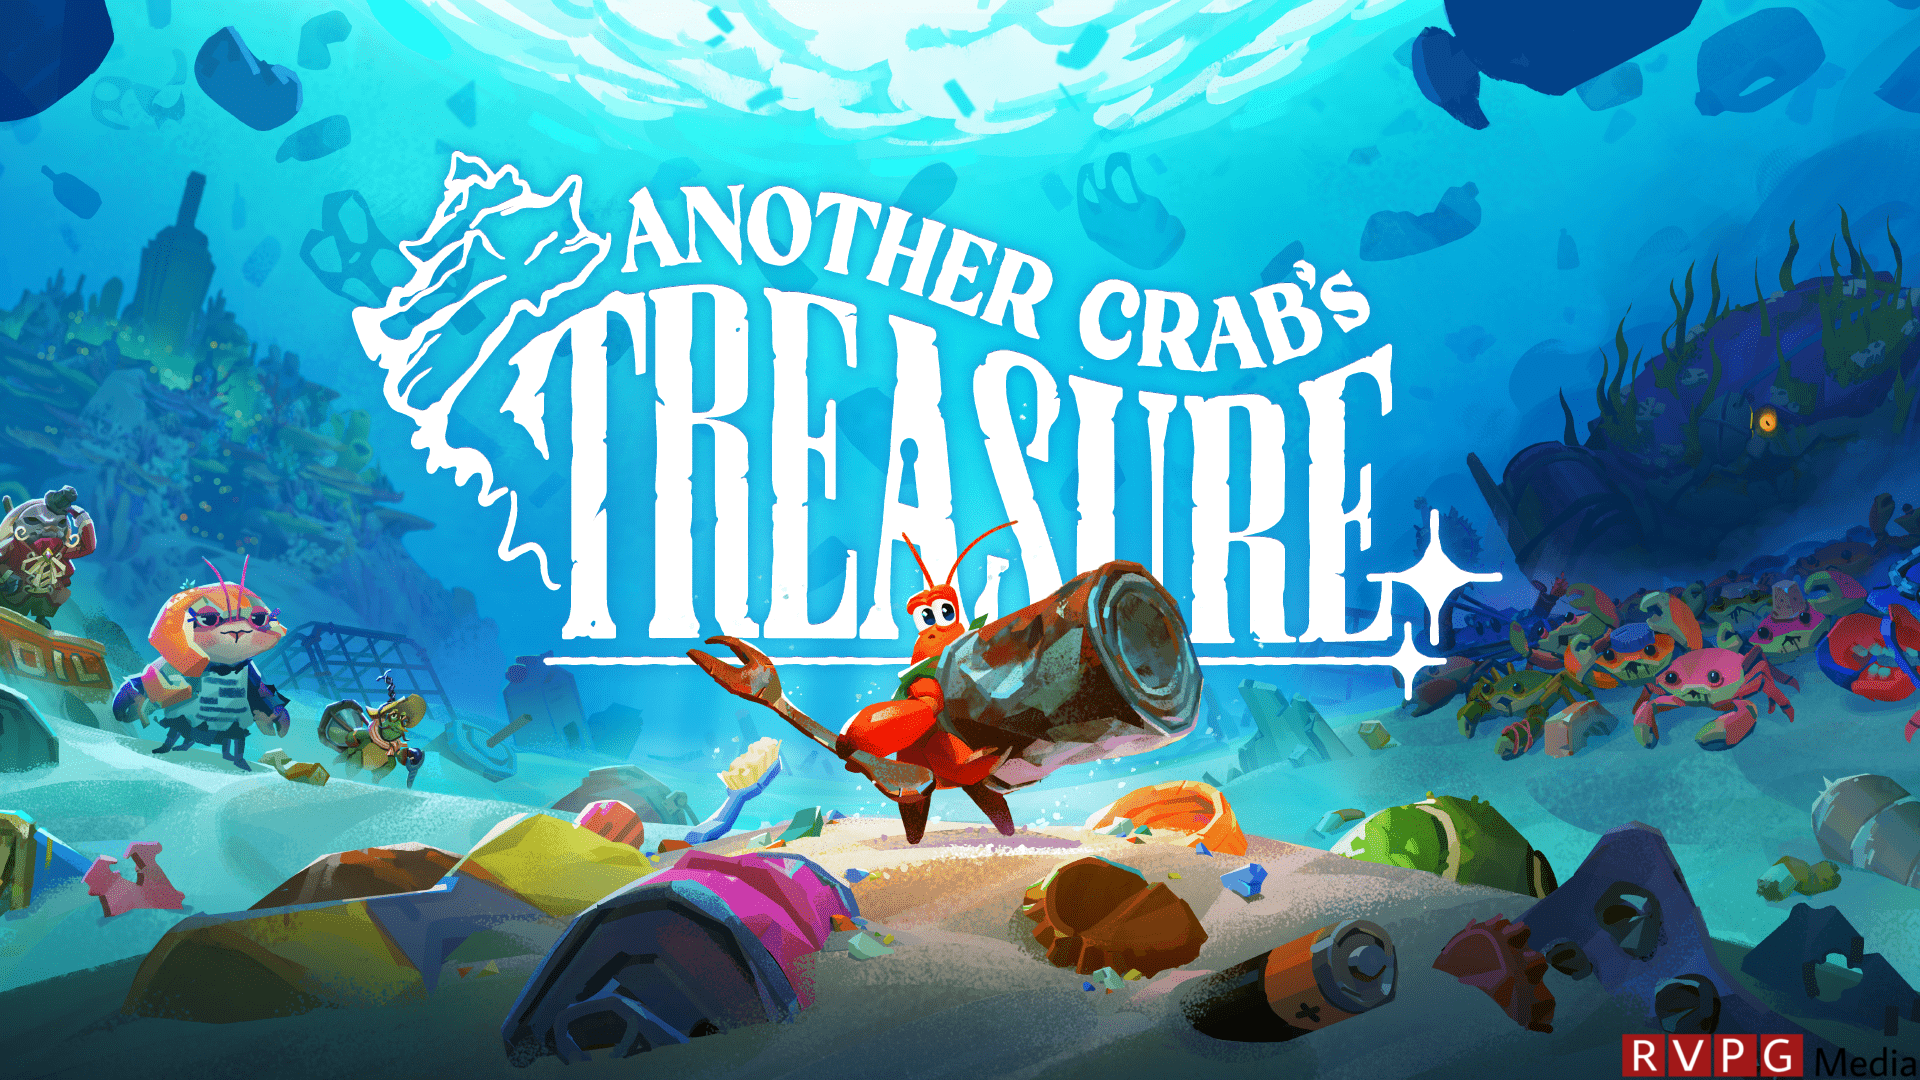 Review: Another Crab's Treasure